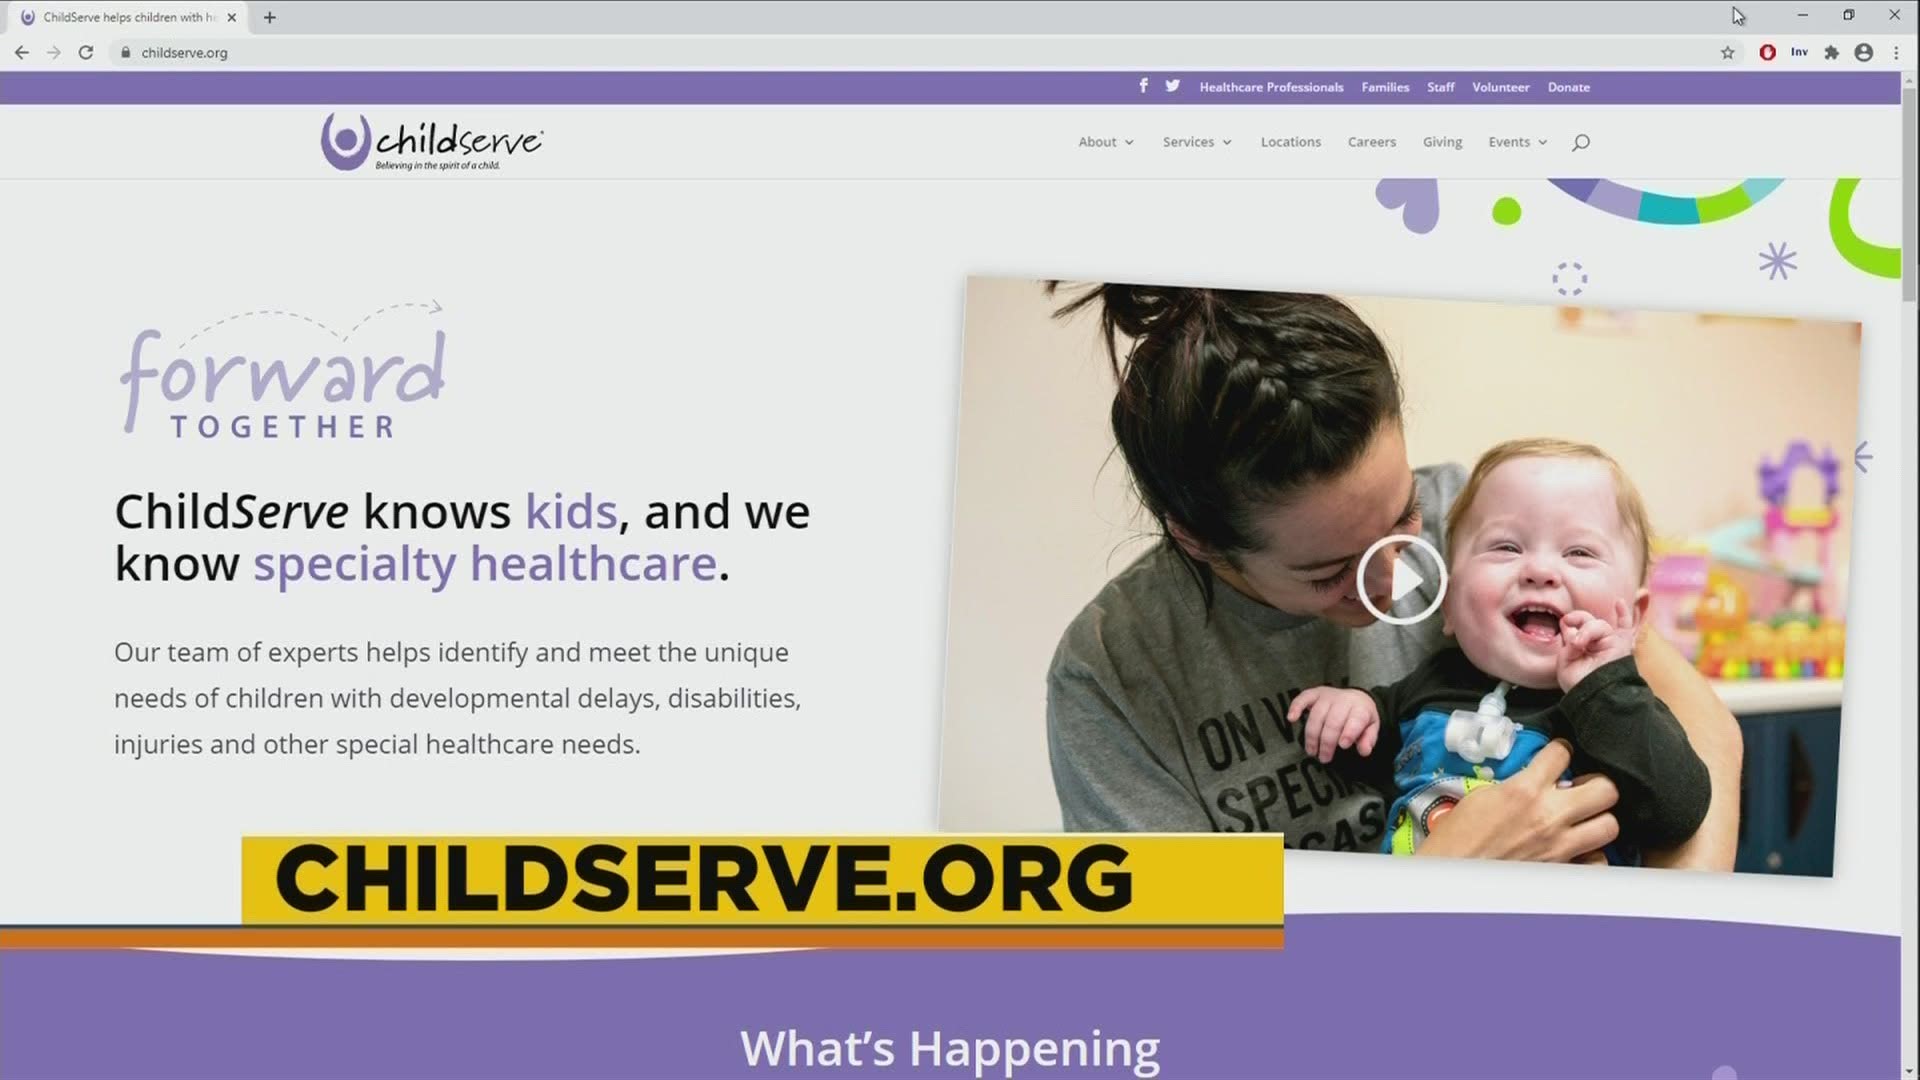 ChildServe completed its largest fundraising effort in the organization's 92-year history, the Forward Together campaign, this Spring.